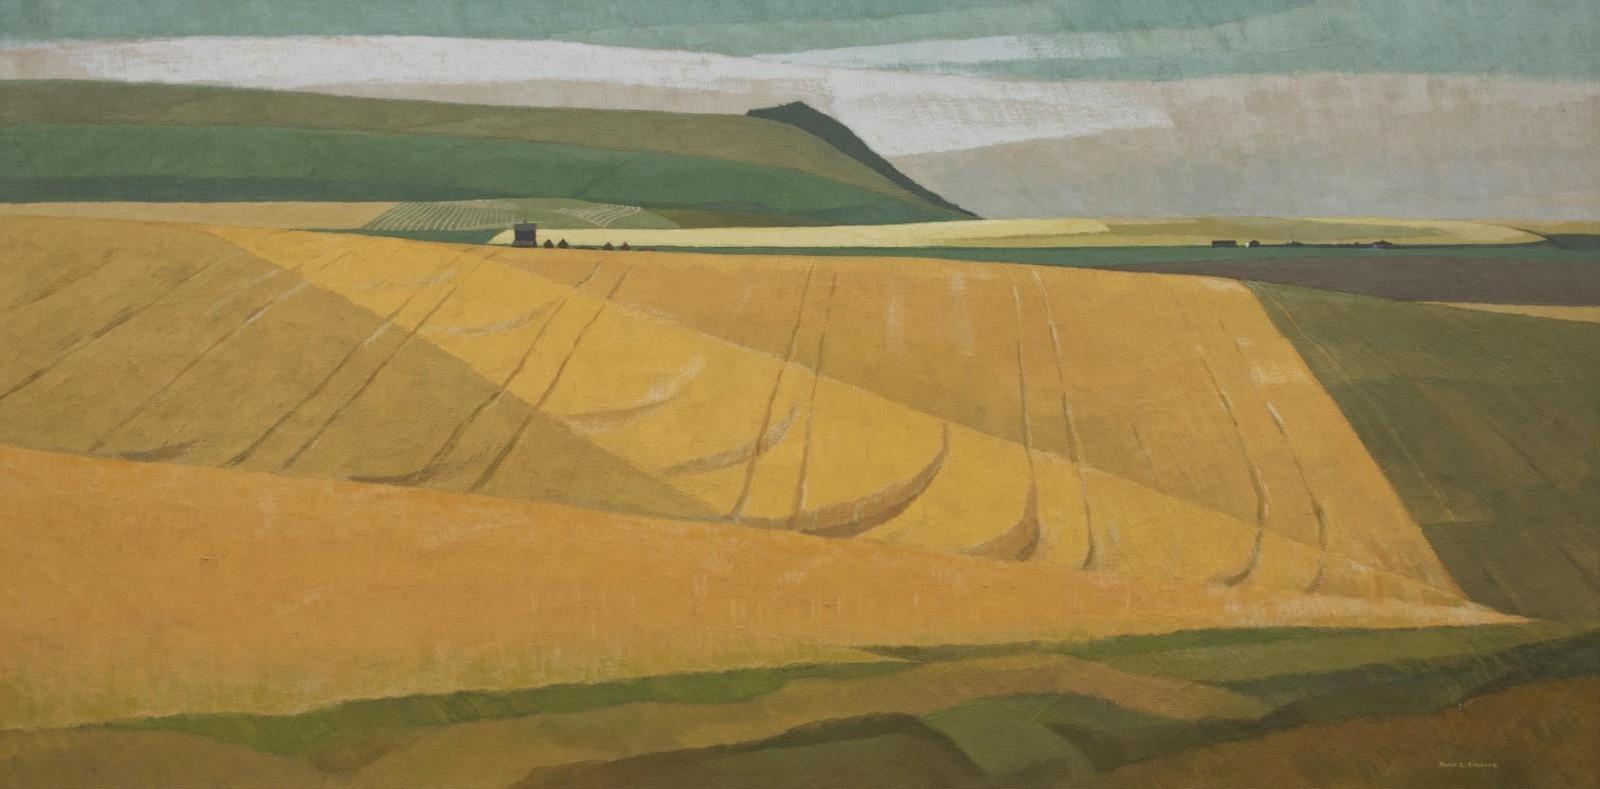 Alan Caswell Collier (1911-1990) - All Is Green And Gold (Near Okotoks, Alberta); 1974